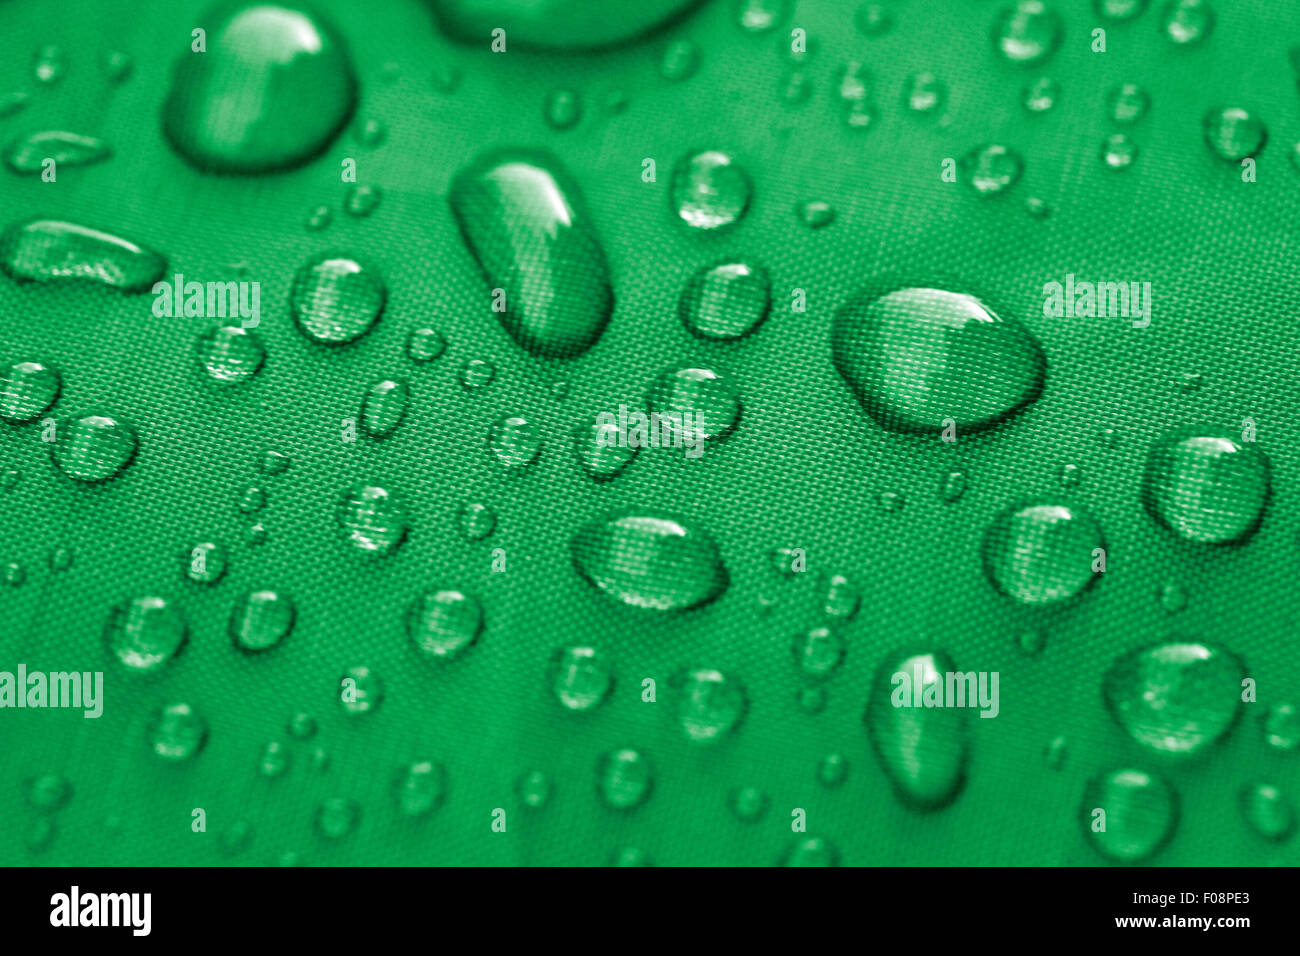 Closeup of rain drops on a green water resistent material Stock Photo